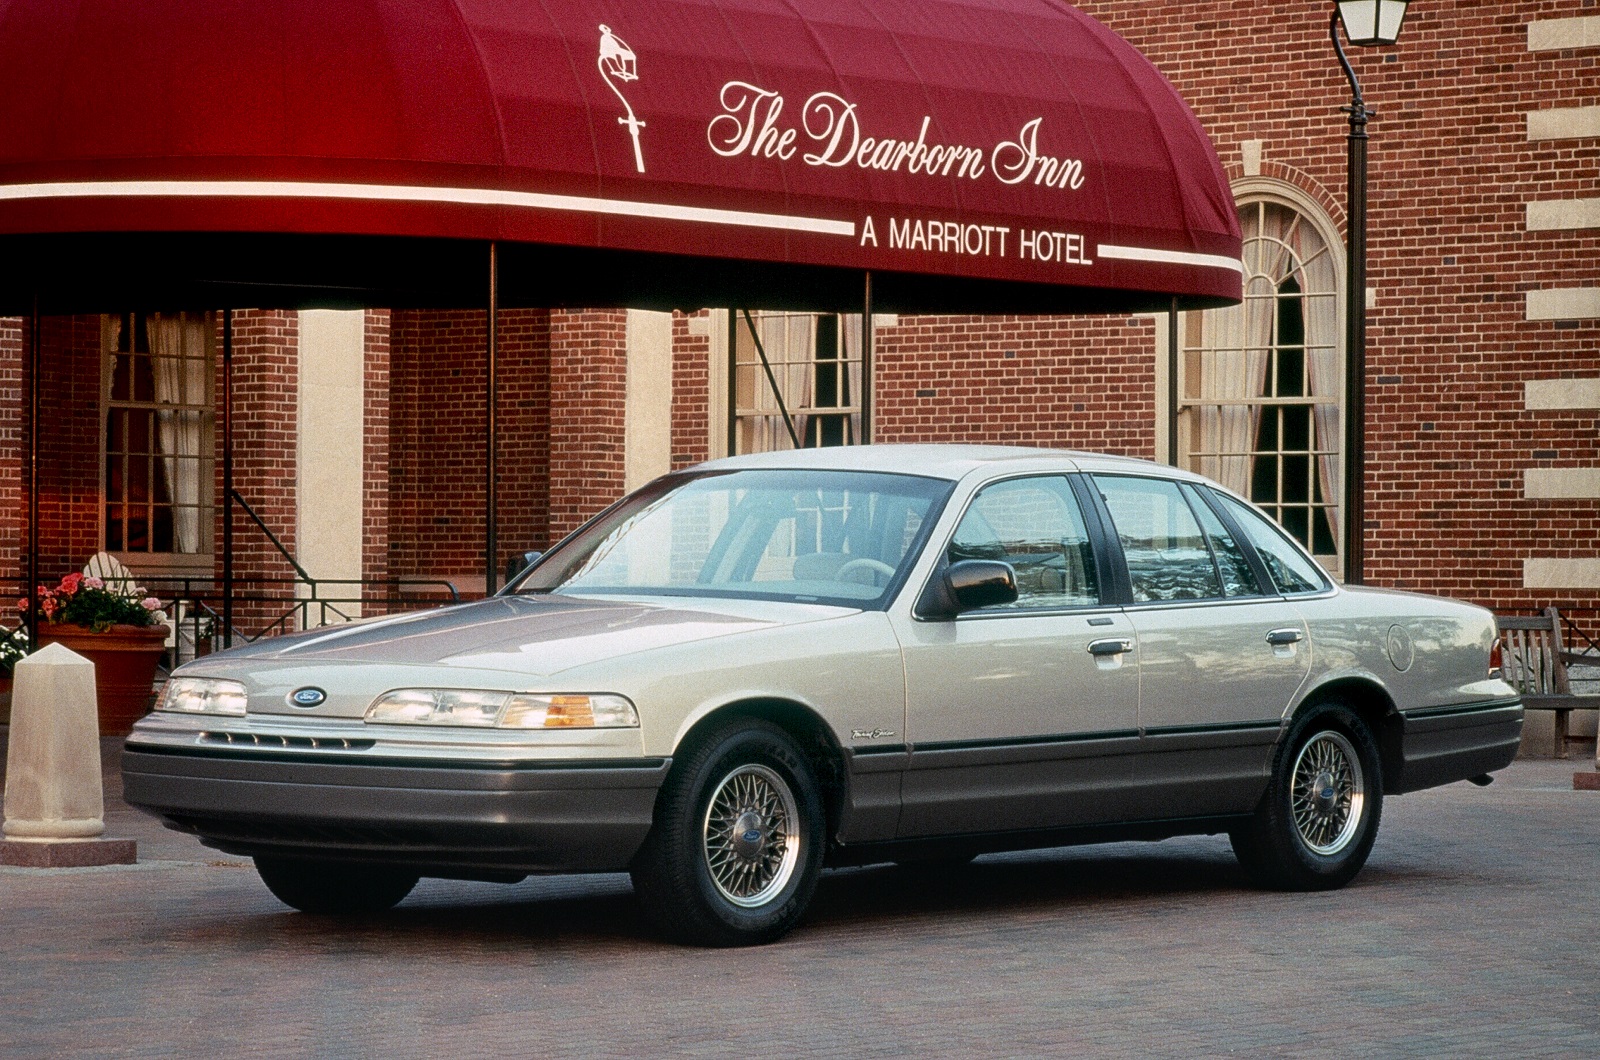 <p>As competitors downsized, Ford continued thinking big. 1992 brought a completely redesigned Crown Victoria with more modern-looking lines and an evolution of its predecessor’s tried-and-true Panther body-on-frame construction. Colloquially called the Crown Vic, it was never envisioned as a volume model but it was a hugely important part of the Ford range because it performed taxi and law enforcement duties across America. It also spawned the <strong>Mercury Grand Marquis</strong> and the <strong>Lincoln Town Car</strong>, which were aimed at a different set of buyers.</p><p>Selling a V8-powered behemoth with a truck-like ladder frame in the 1990s sounded like a recipe for disaster but Ford beat the odds. Crown Victoria sales stayed above the 100,000 mark for most of the decade and it was popular enough to warrant the launch of a comprehensively updated model for <strong>1998</strong>. It hogged an <strong>85%</strong> share of the police vehicle market in America and in Canada in 1999, so keeping it around — and even investing money into improvements — made financial sense.</p>